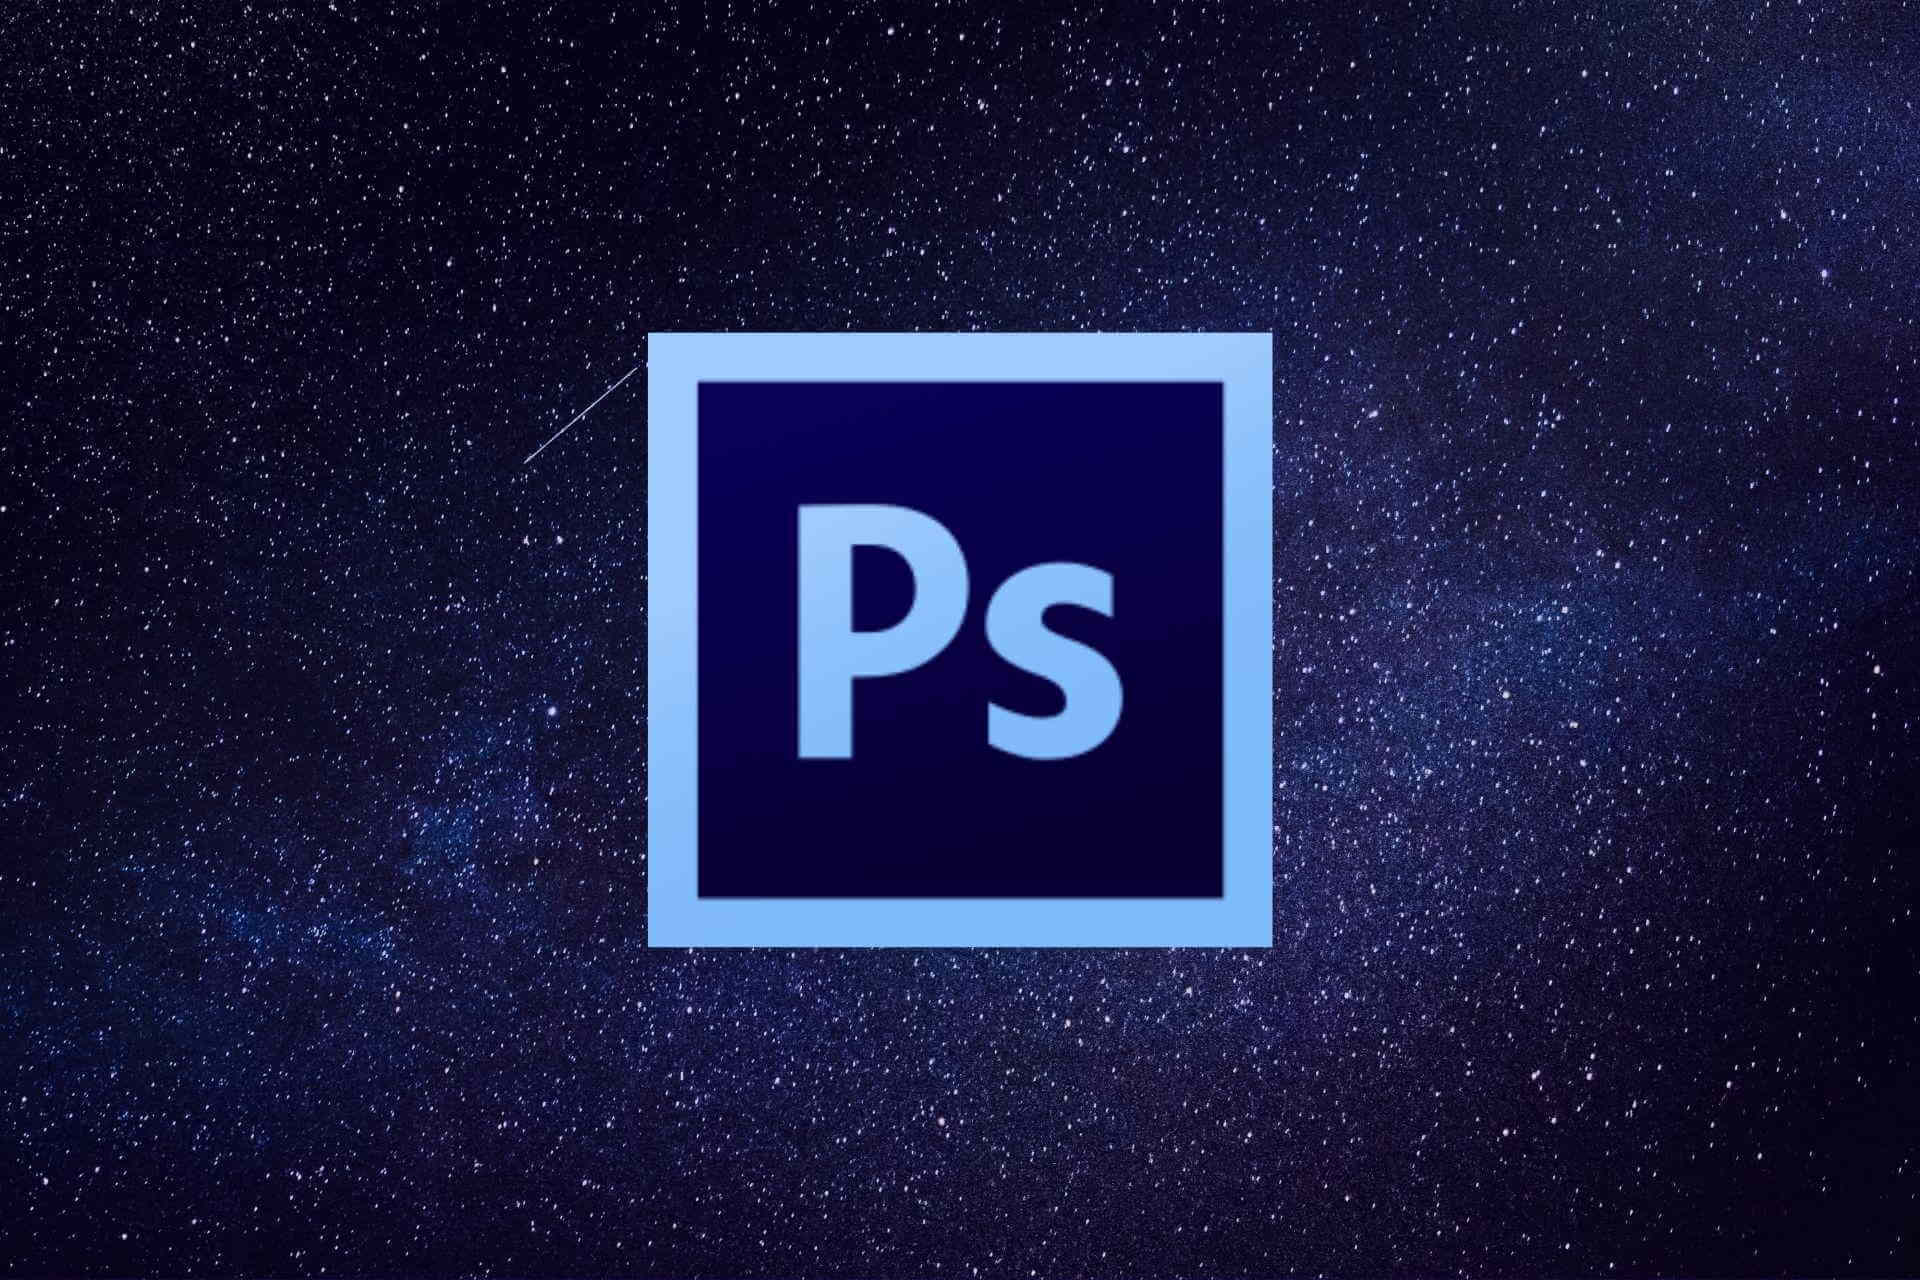 Fix font size problems in Photoshop